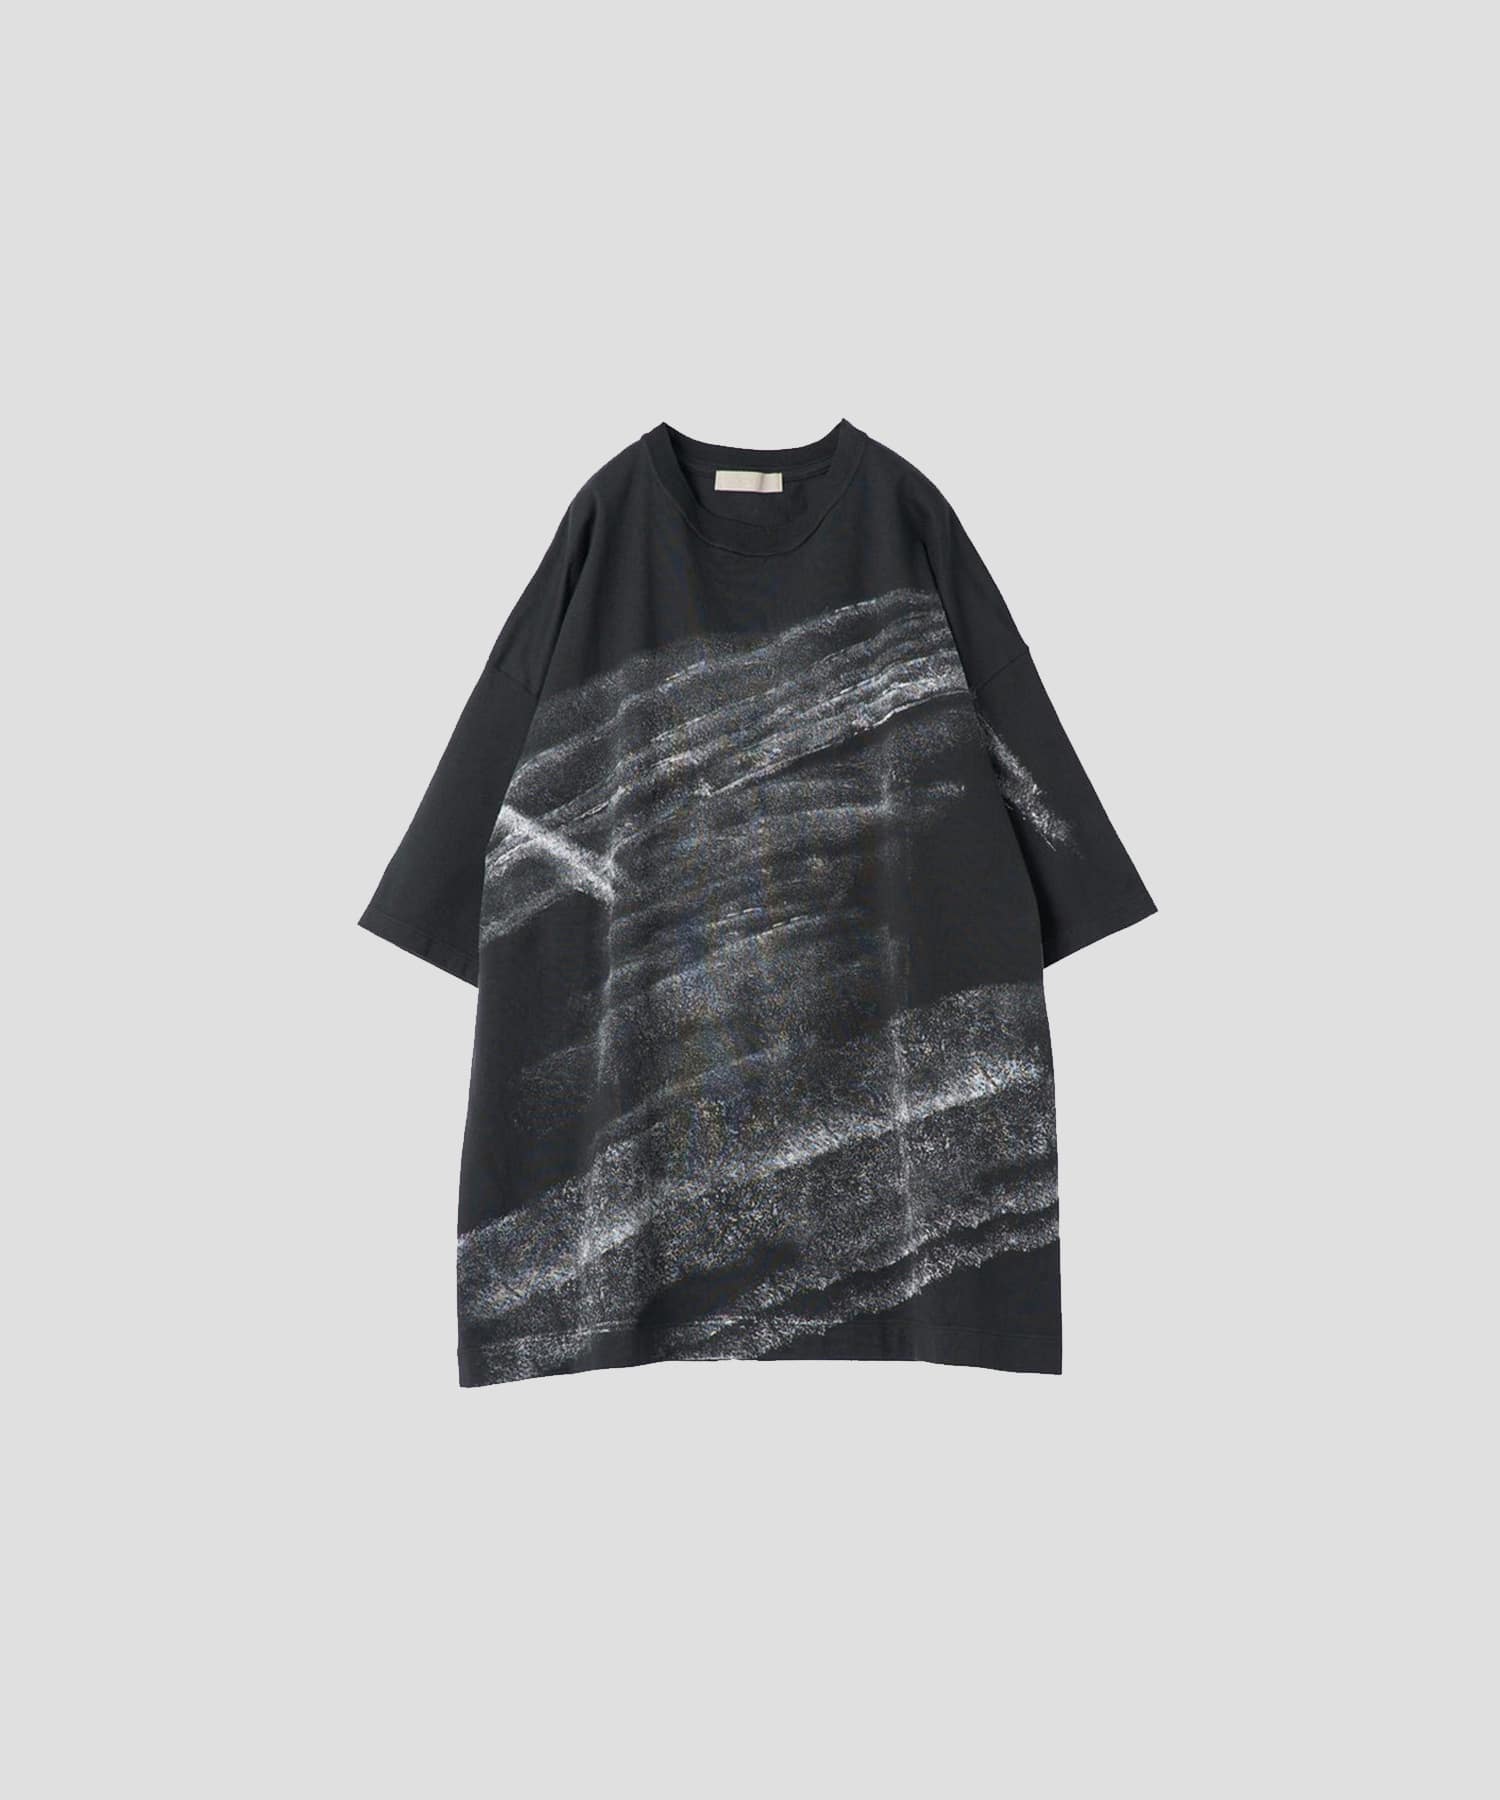 ABSTRACT PAINTED T-SHIRT